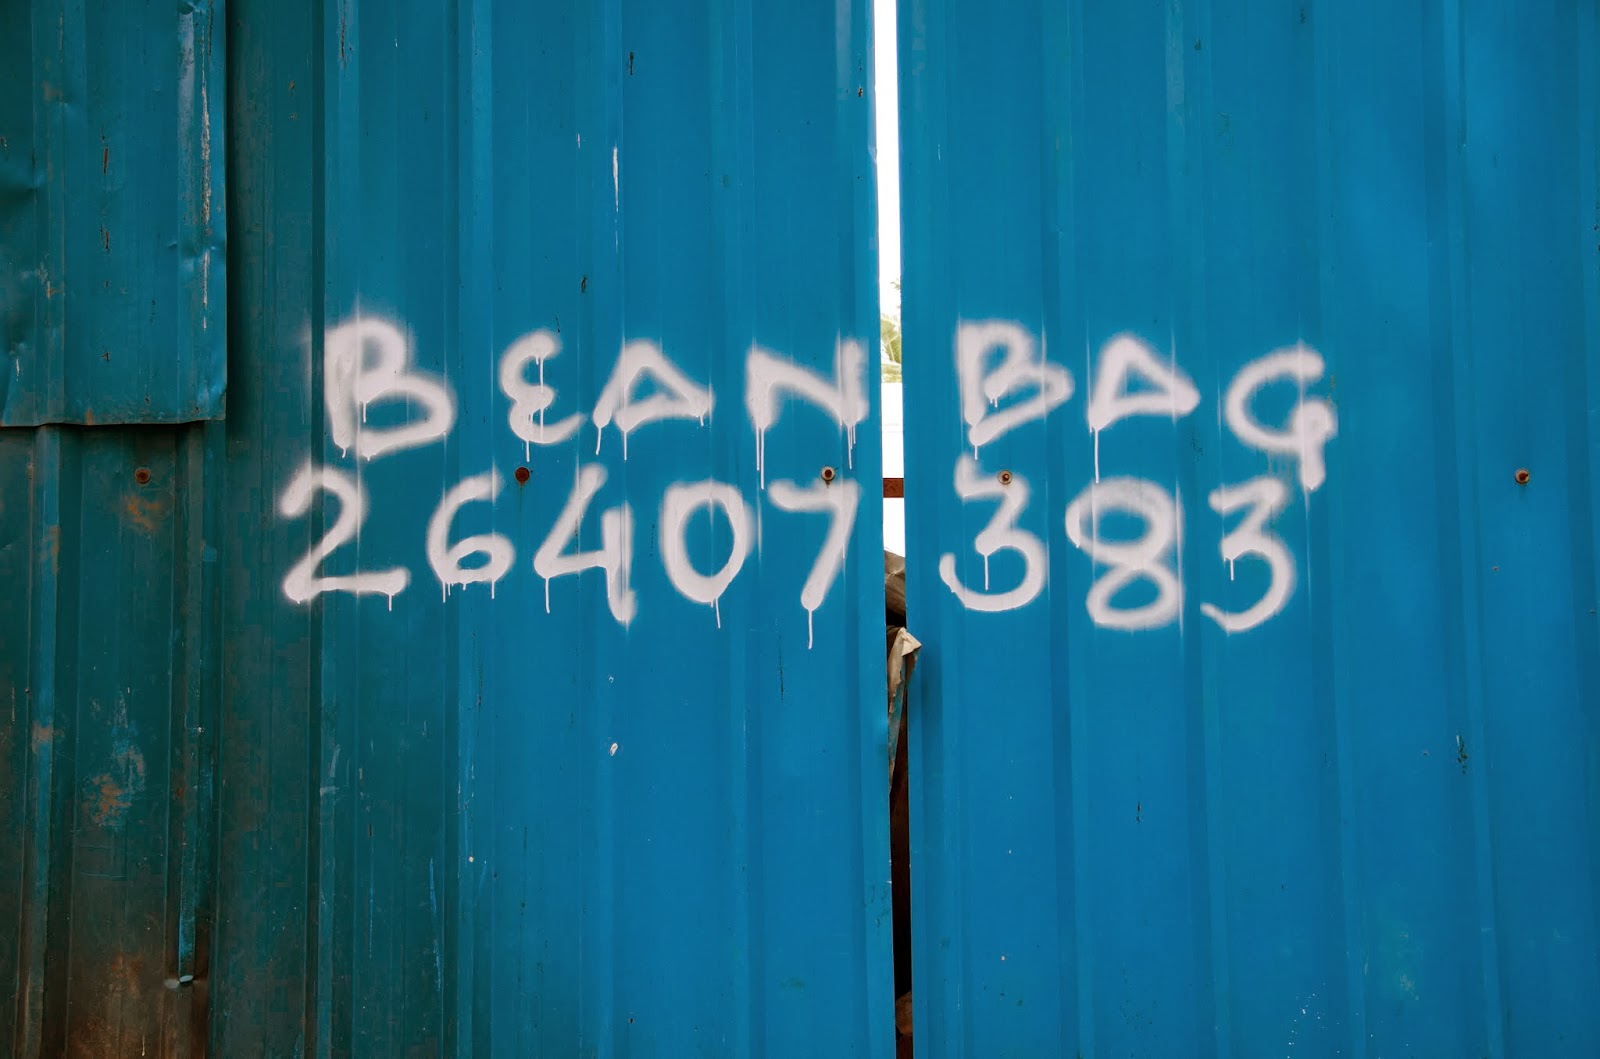 bean bags sales ad spray painted on a tin sheets
